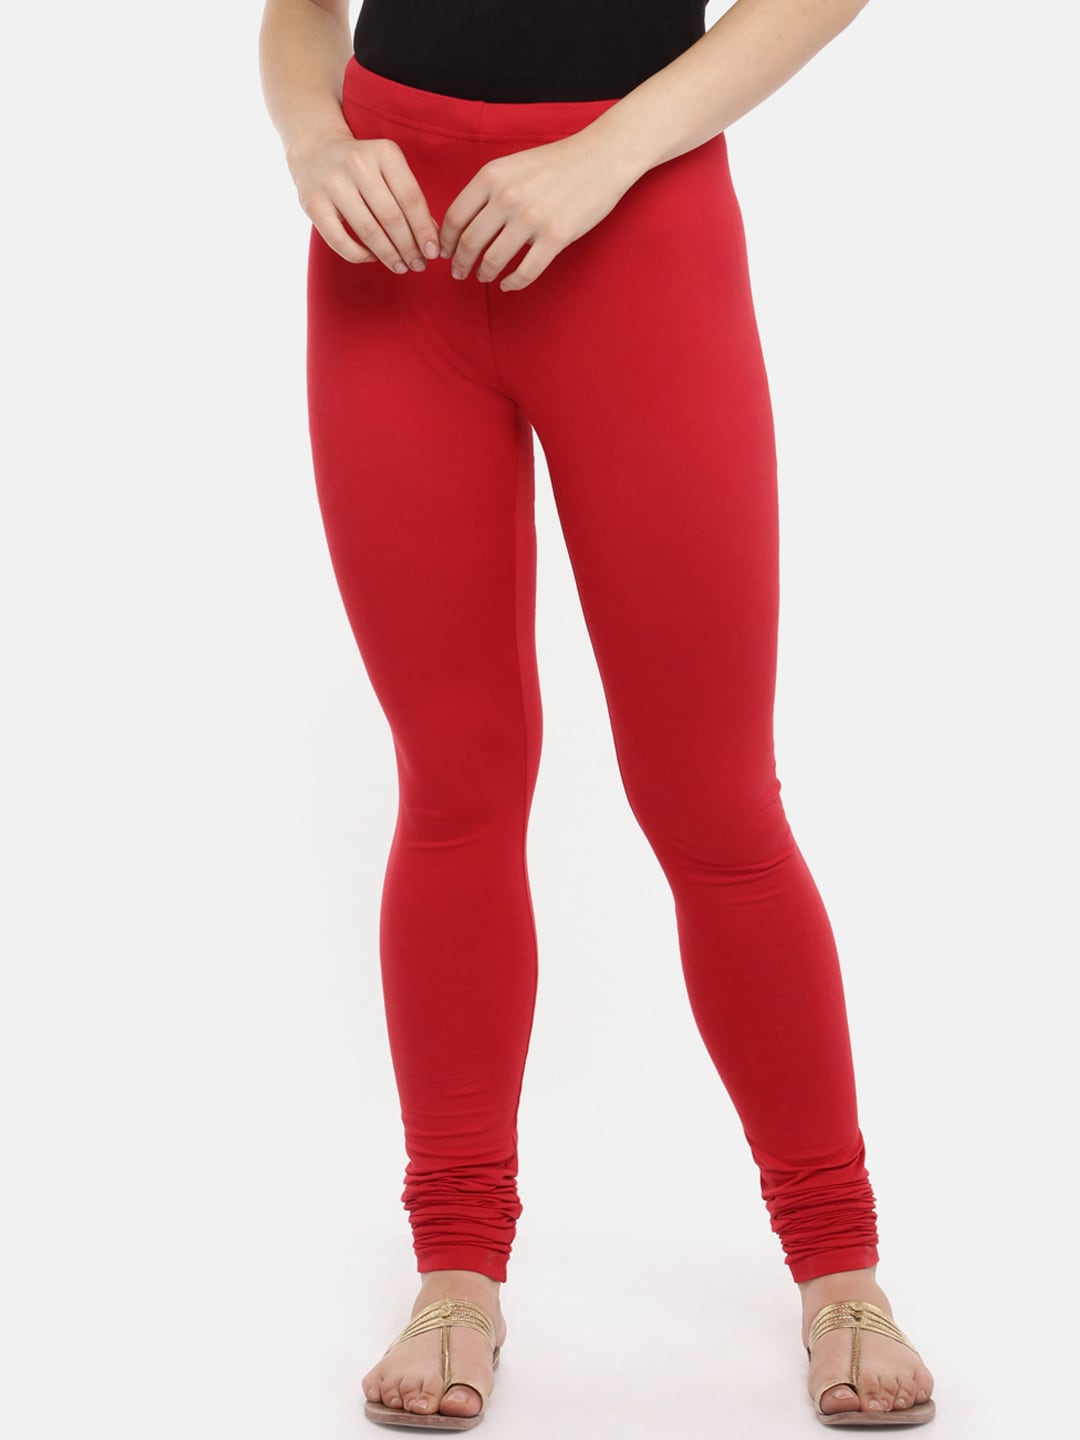 RANGMANCH BY PANTALOONS Women Red Solid Slim Fit Leggings Price in India